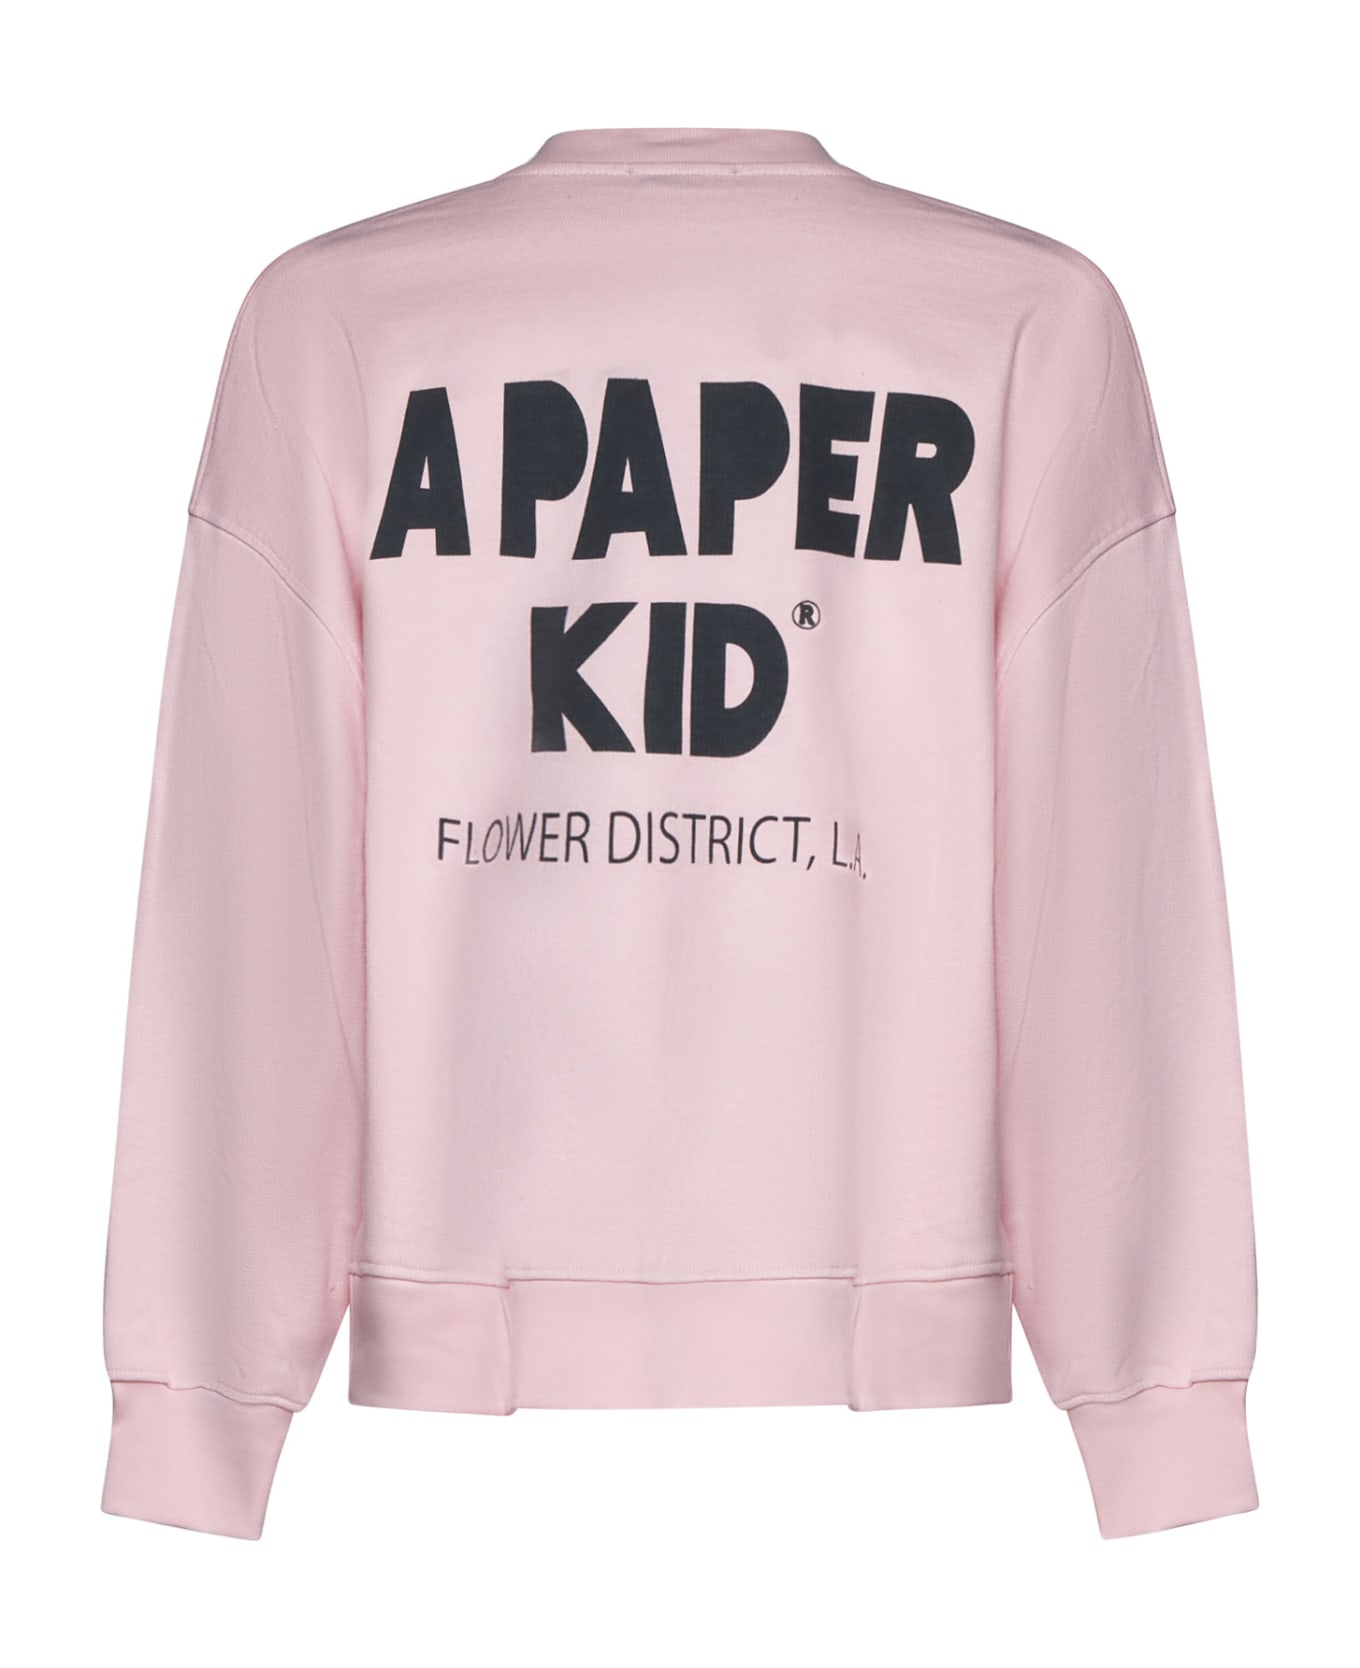 A Paper Kid Sweater - Pink